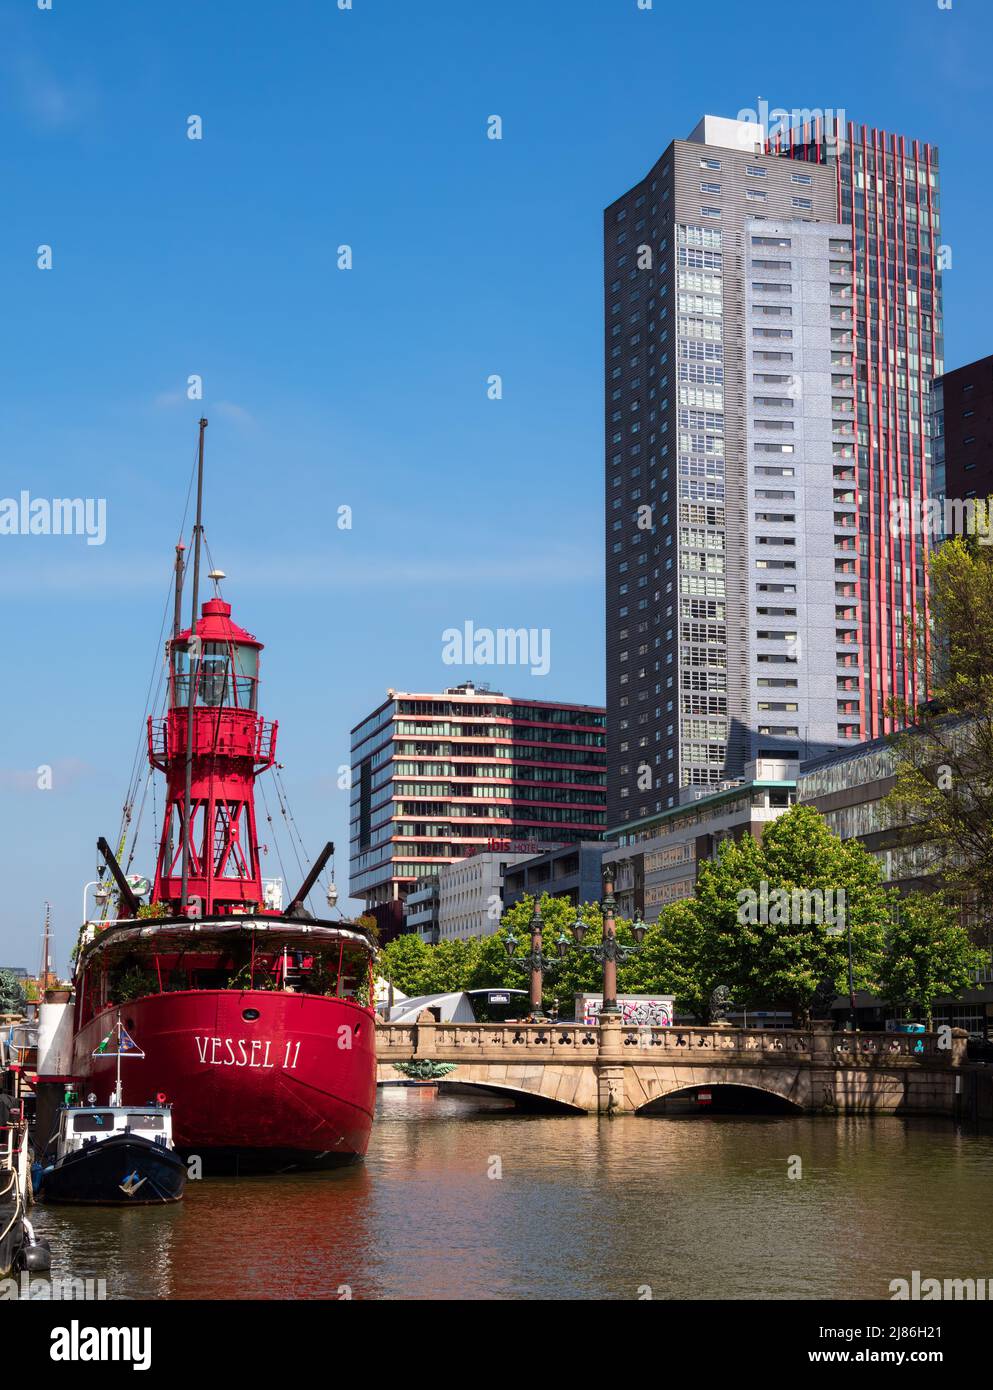 Rotterdam, Netherlands - April 28, 2022: Red ship Vesel II in Rotterdam, converted into a restaurant and modern residential buildings Stock Photo